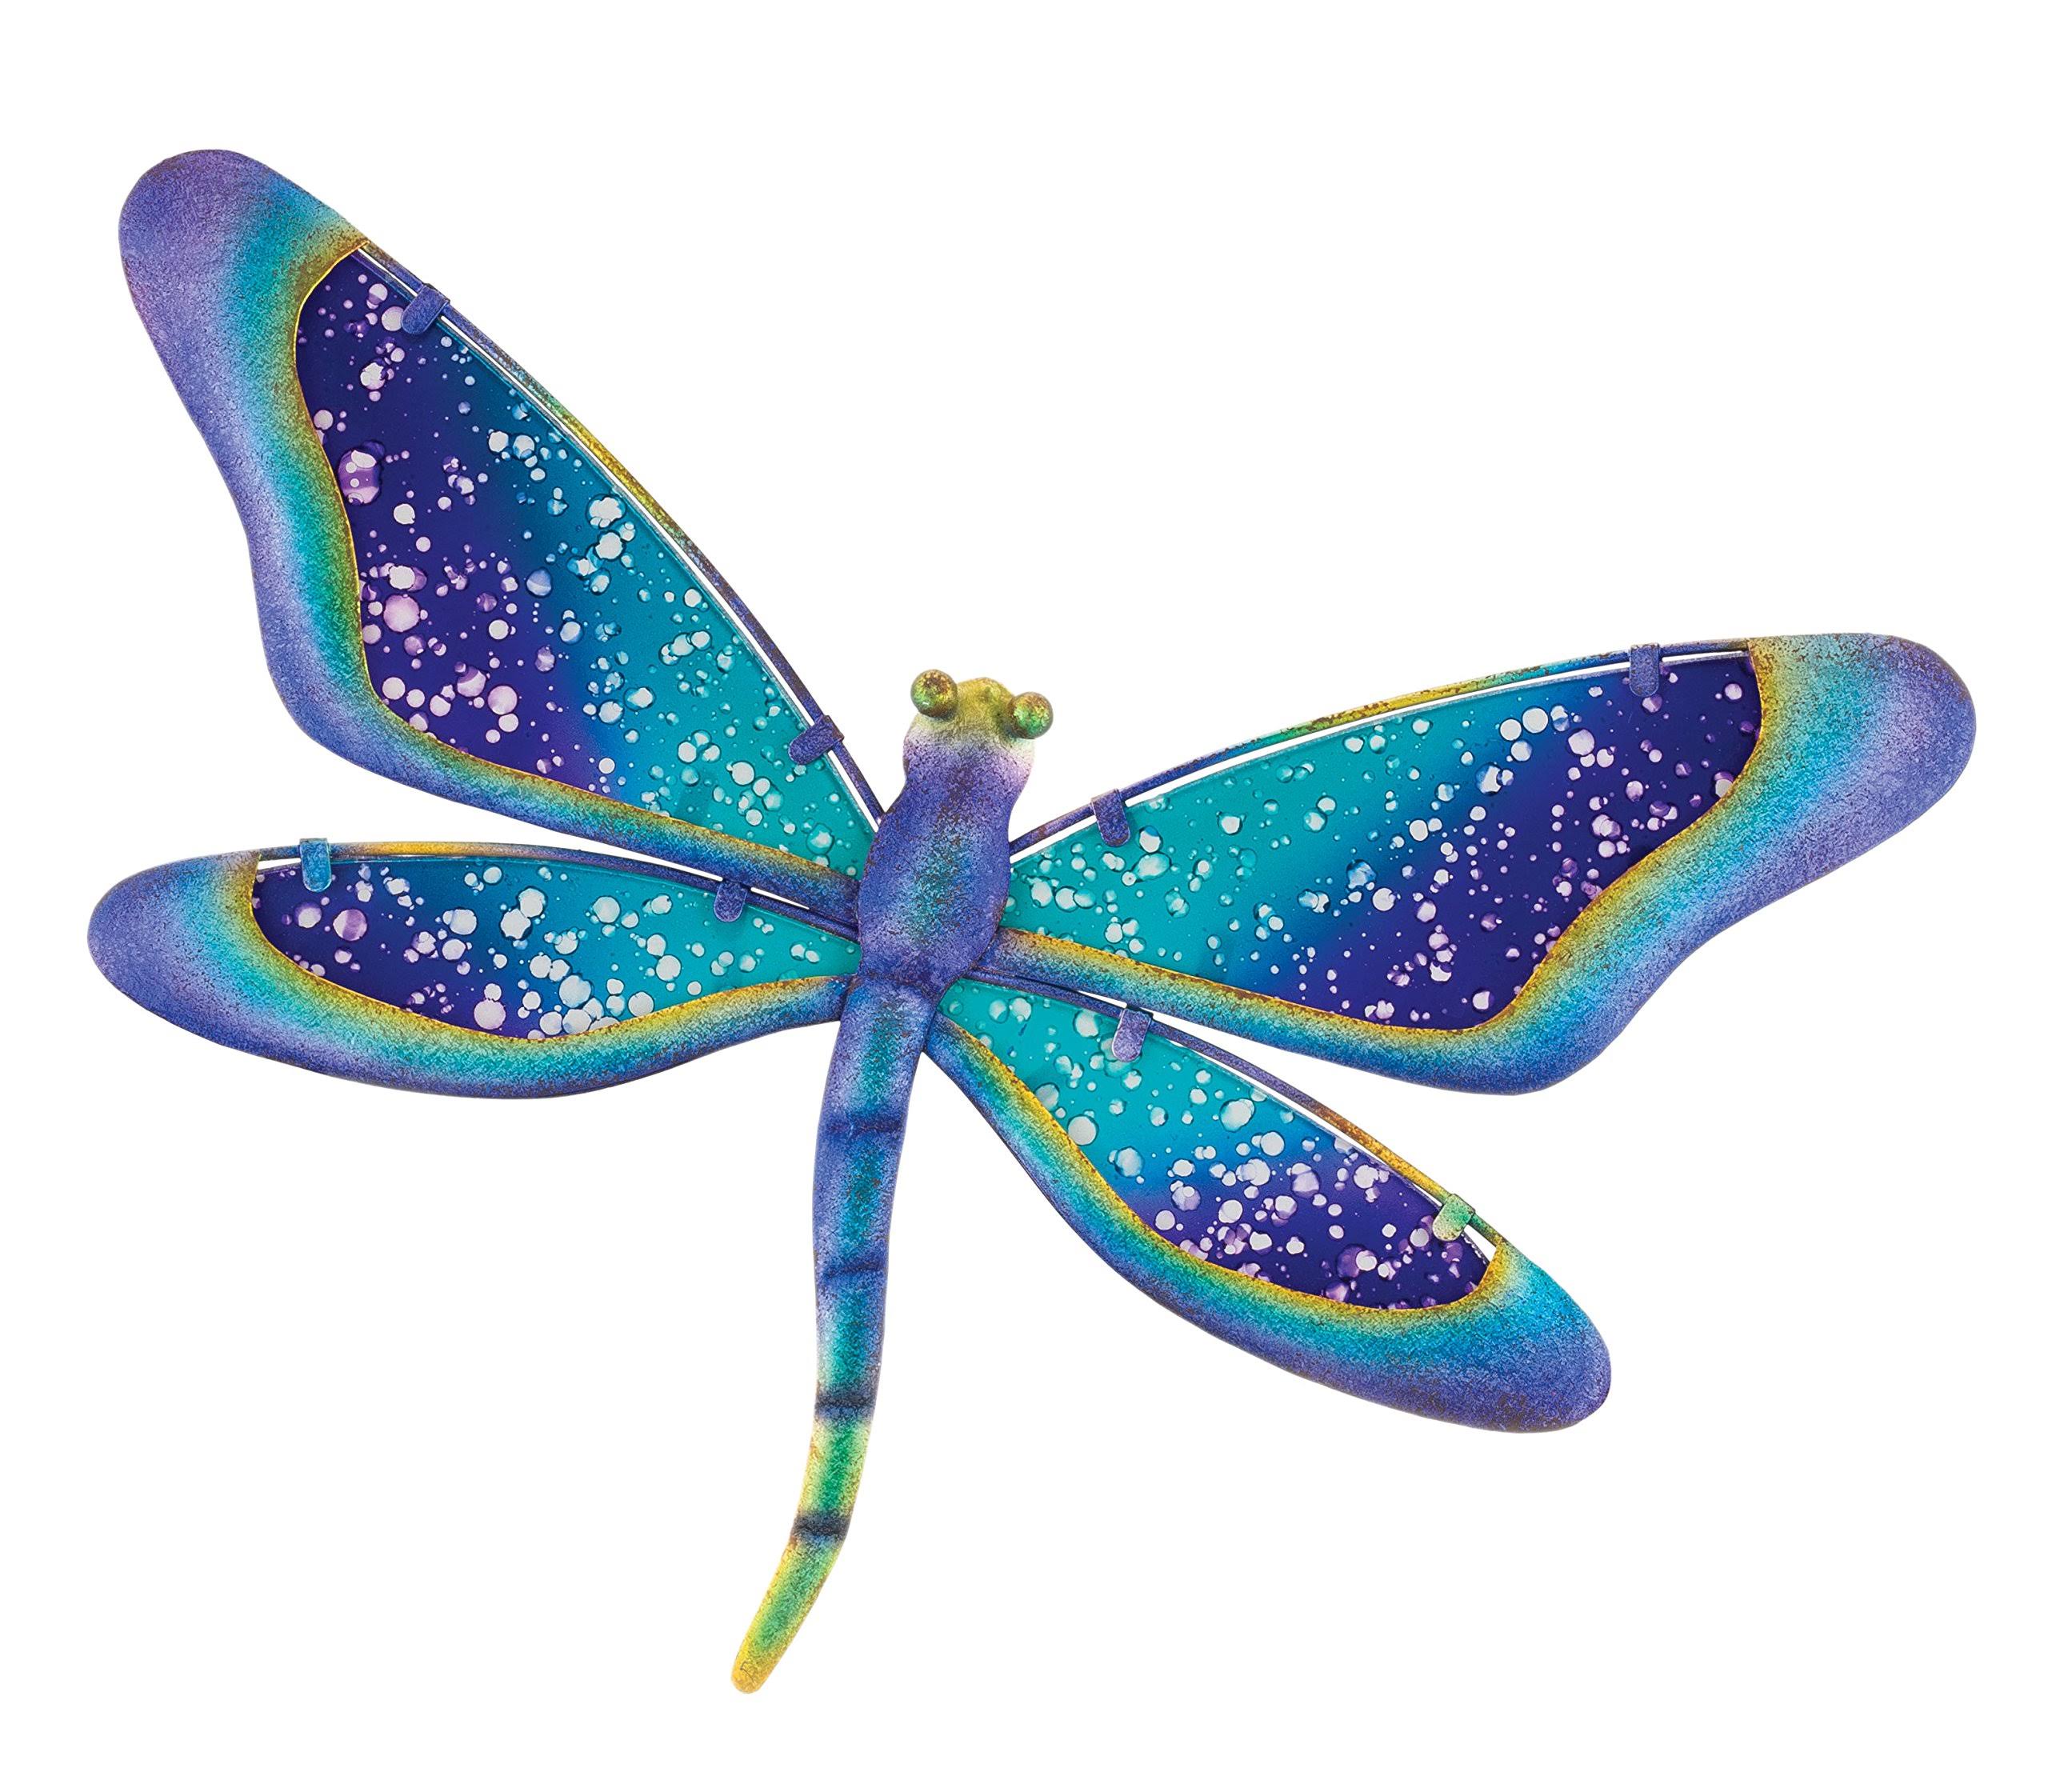 Regal Art & Gift Dragonfly Watercolor Wall Decor, 11"